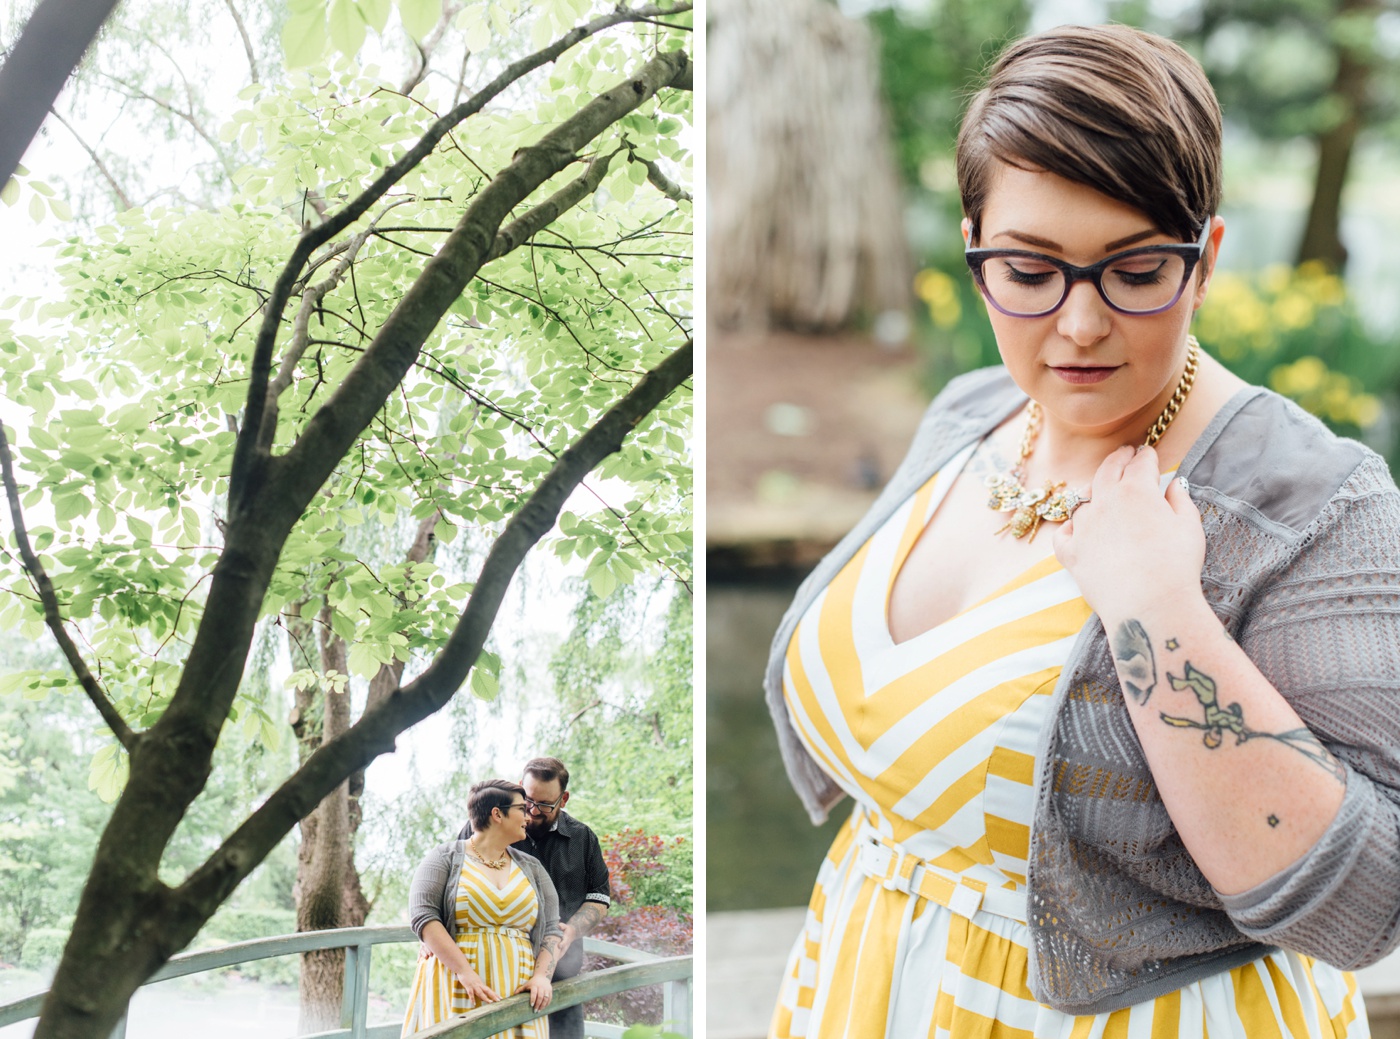 Erin + Tim - Grounds for Sculpture - Hamilton New Jersey Engagement Session - Alison Dunn Photography photo